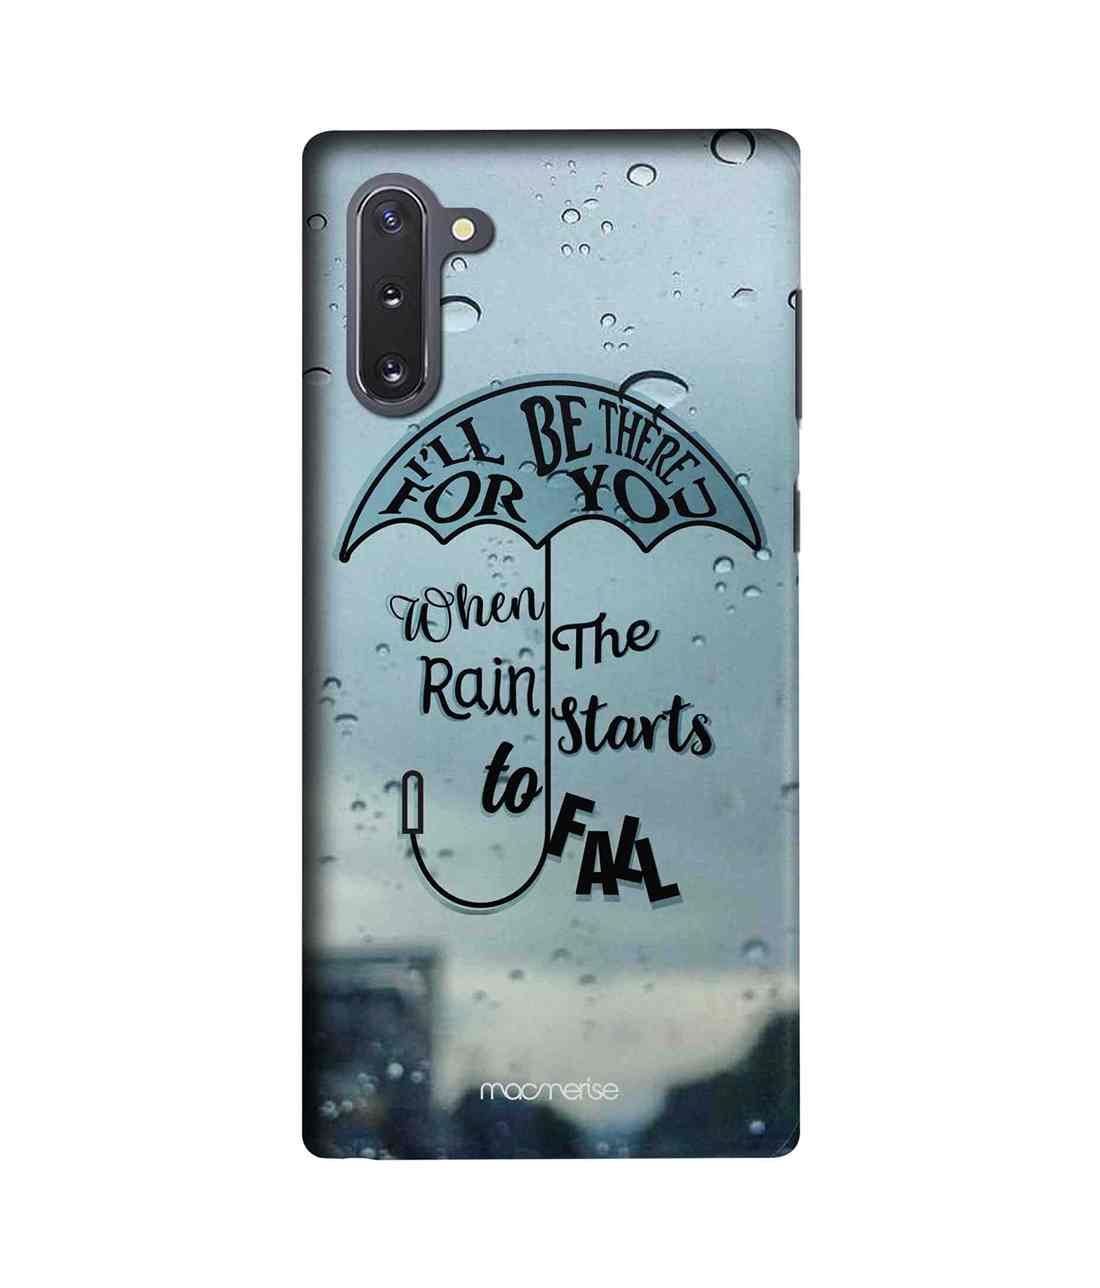 Buy Be There for You - Sleek Phone Case for Samsung Note10 Online